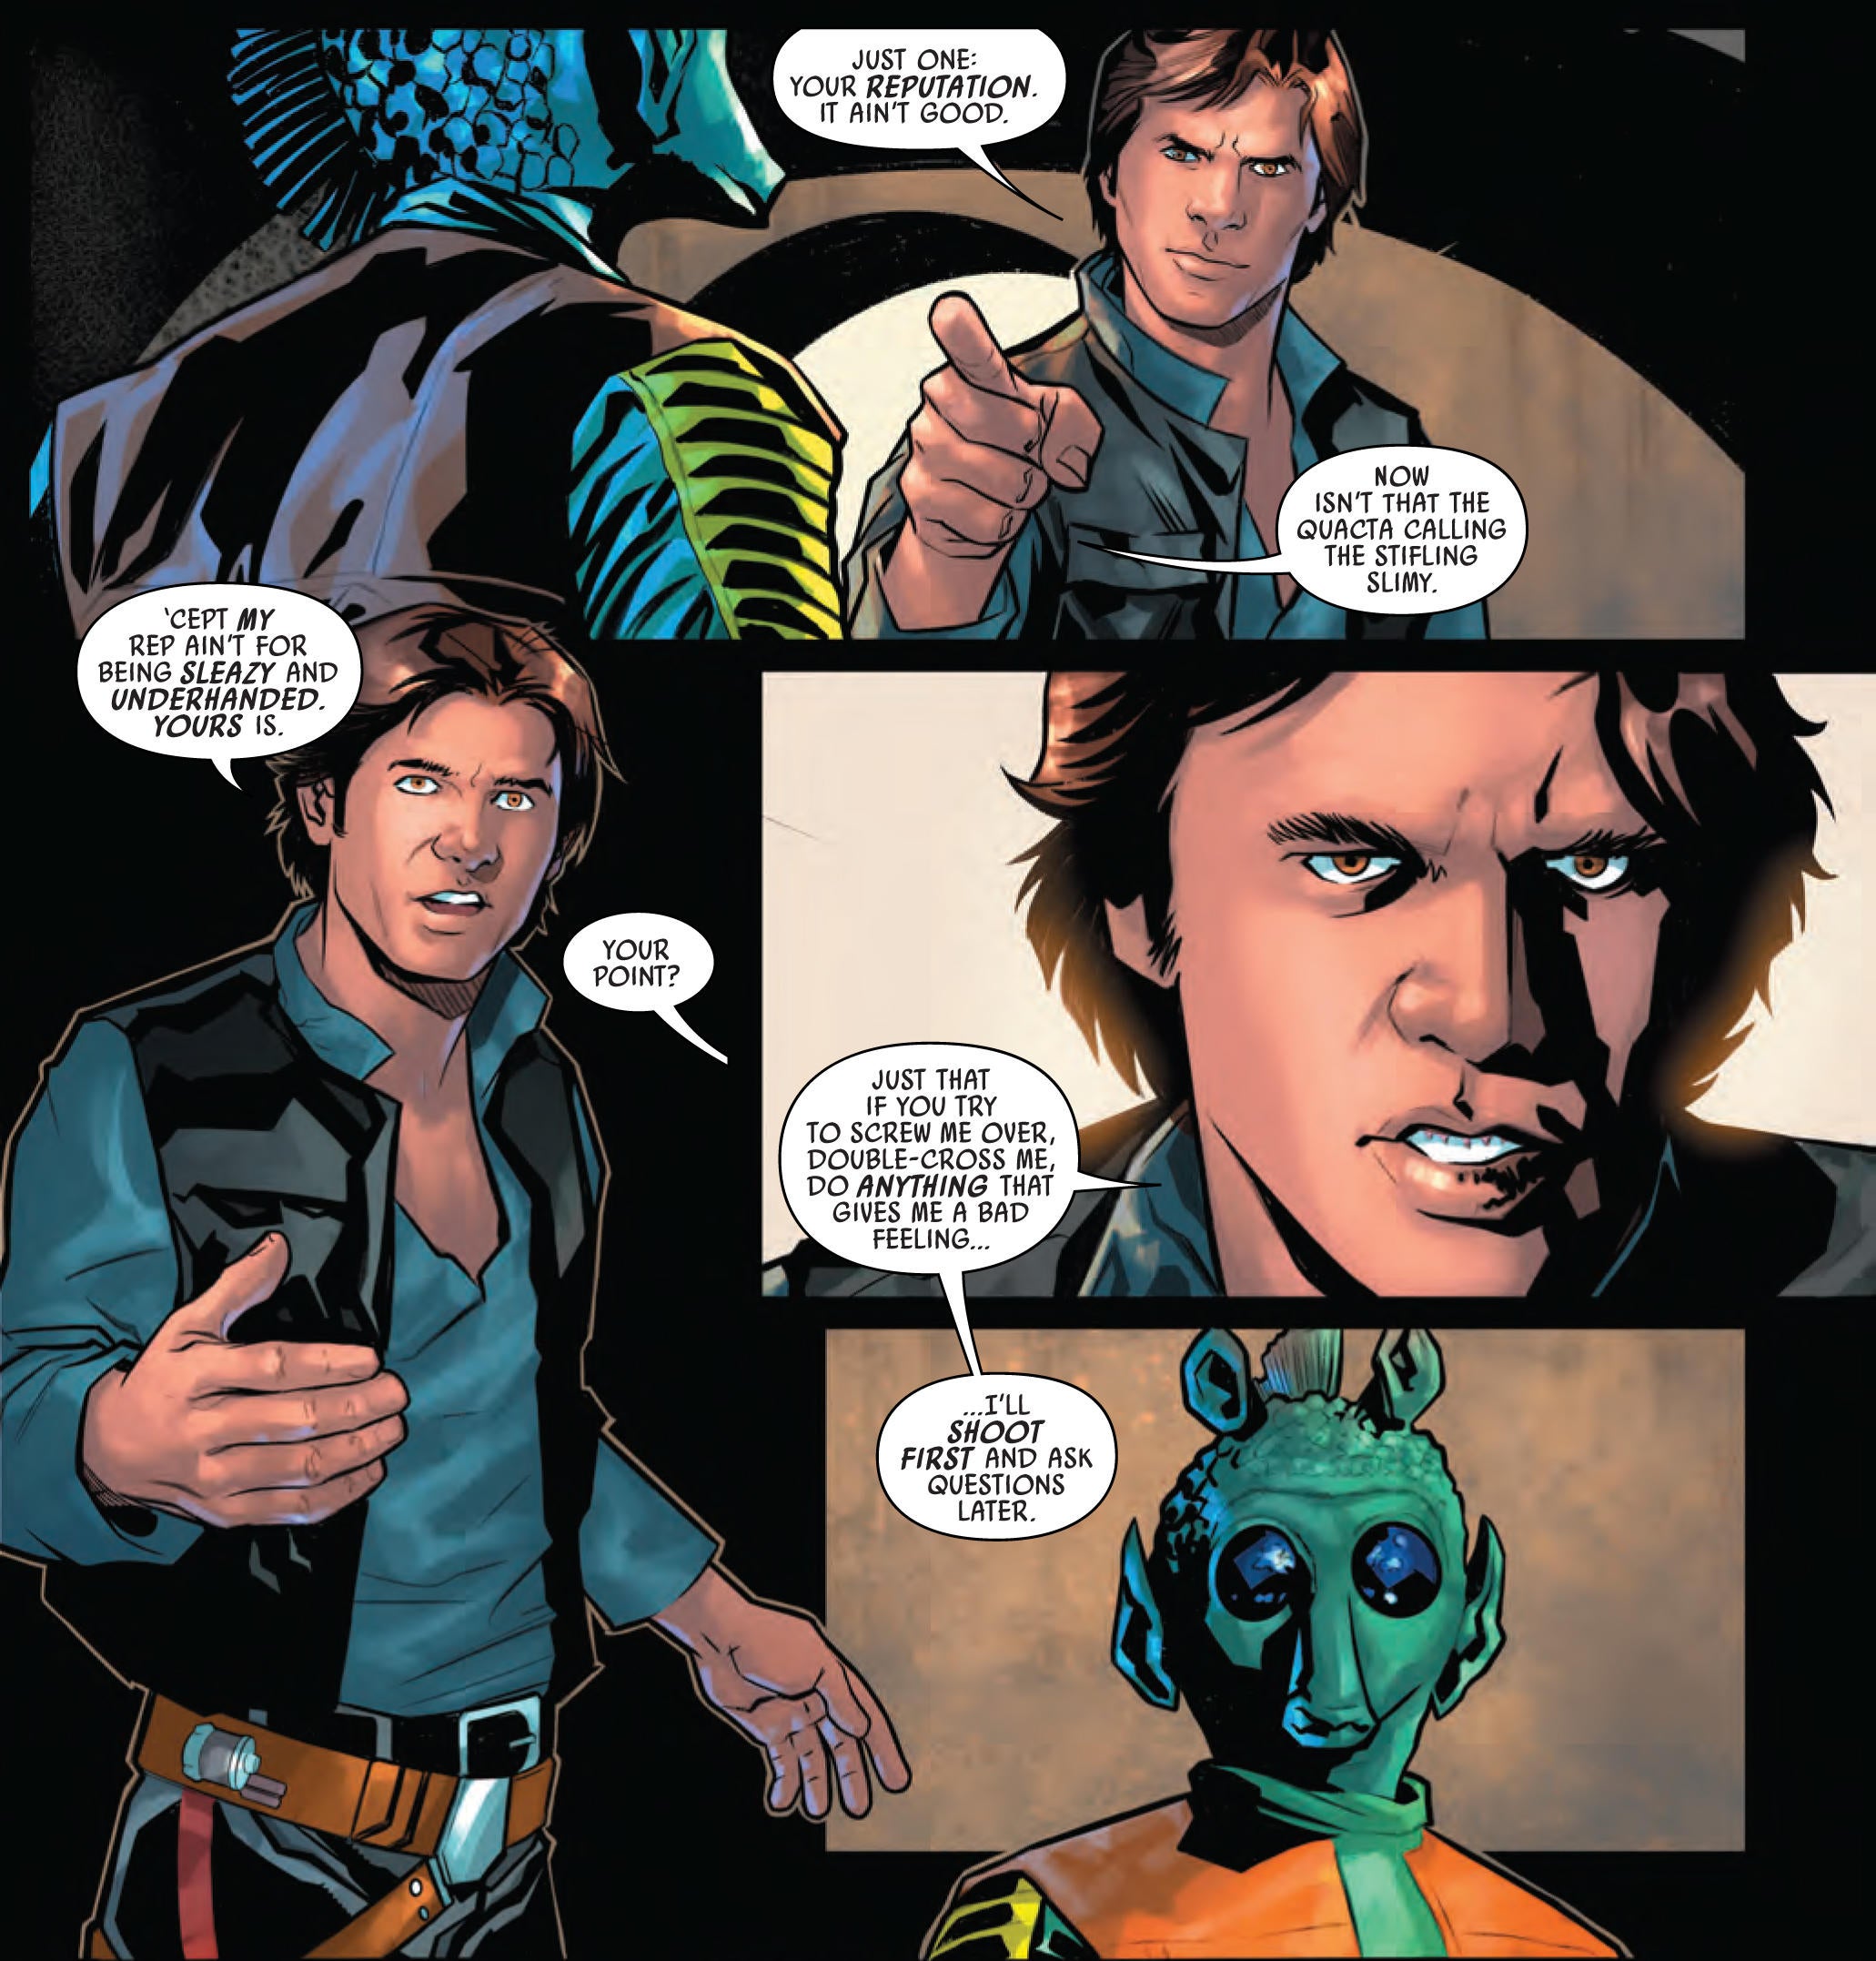 star-wars-a-new-hope-han-solo-greedo-shoot-first-explained.jpg